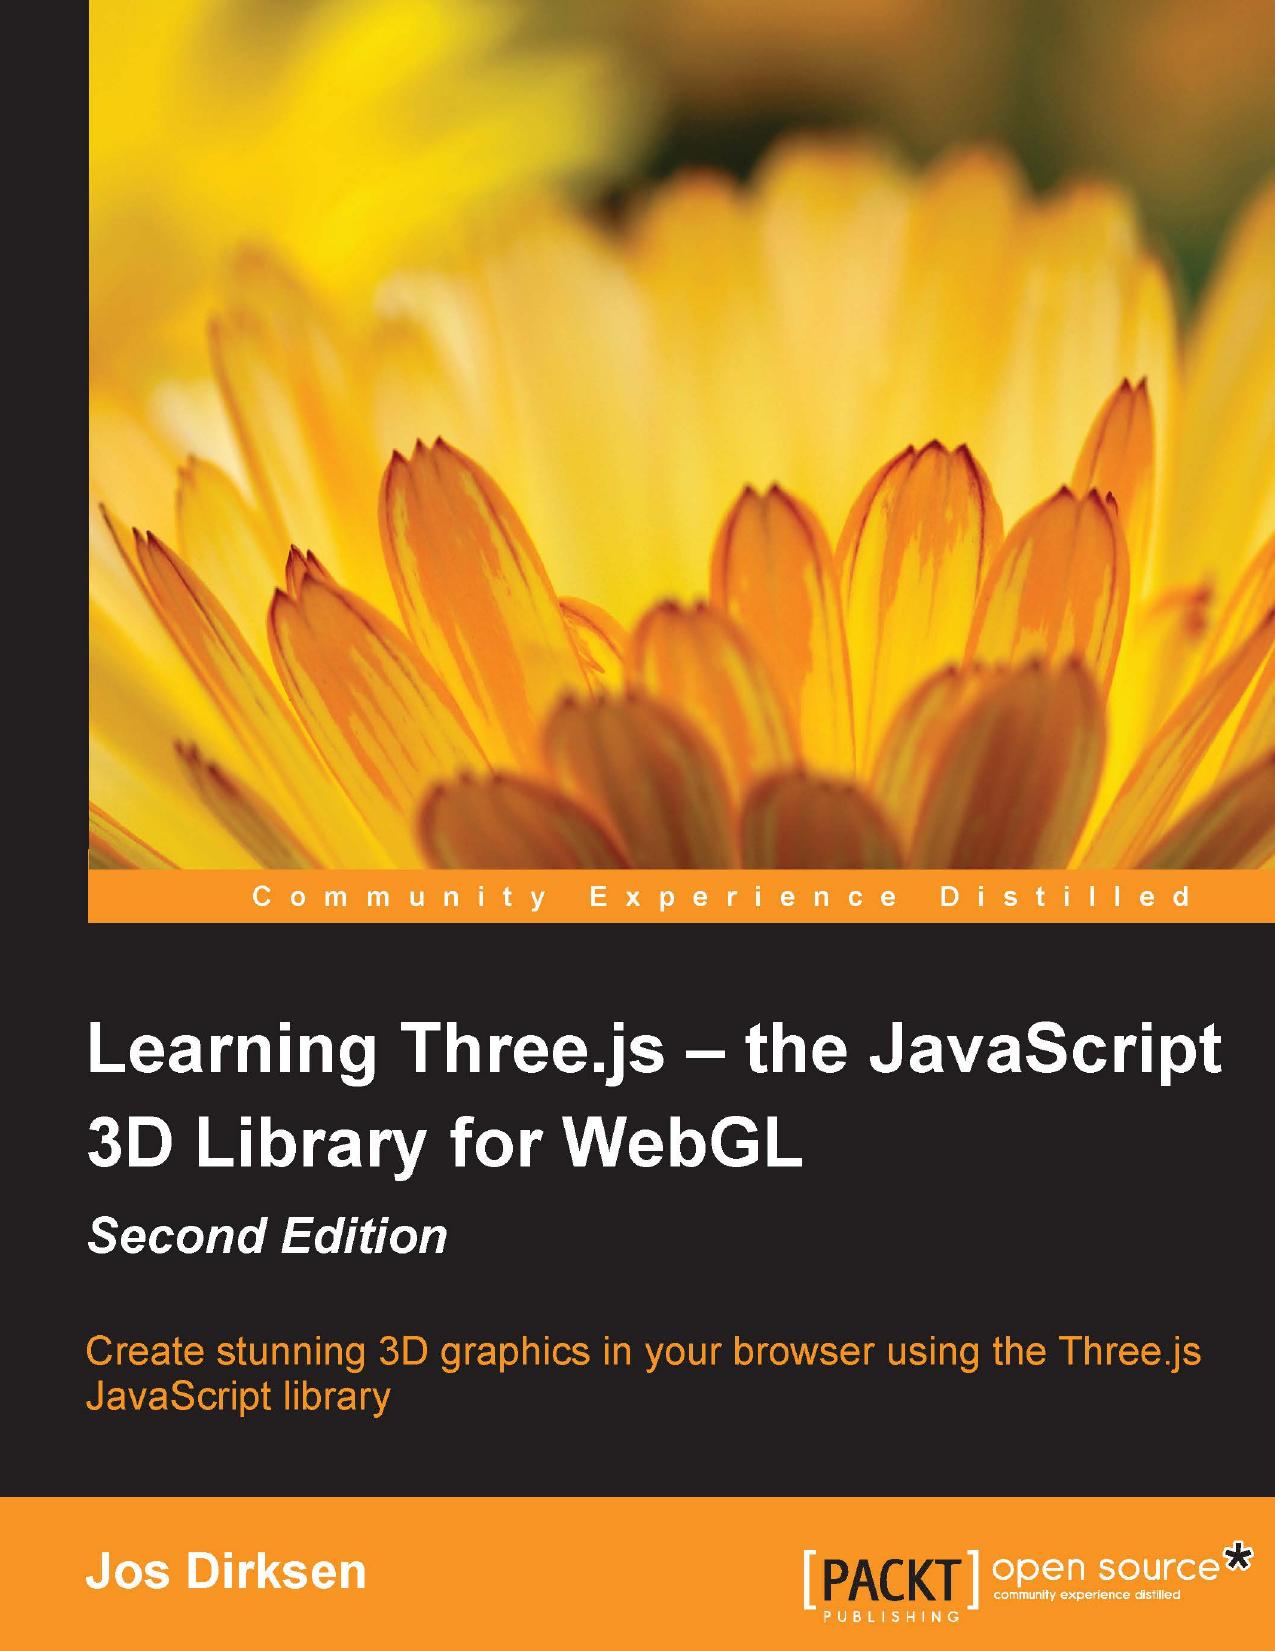 Learning Three.Js: The JavaScript 3D Library for Webgl